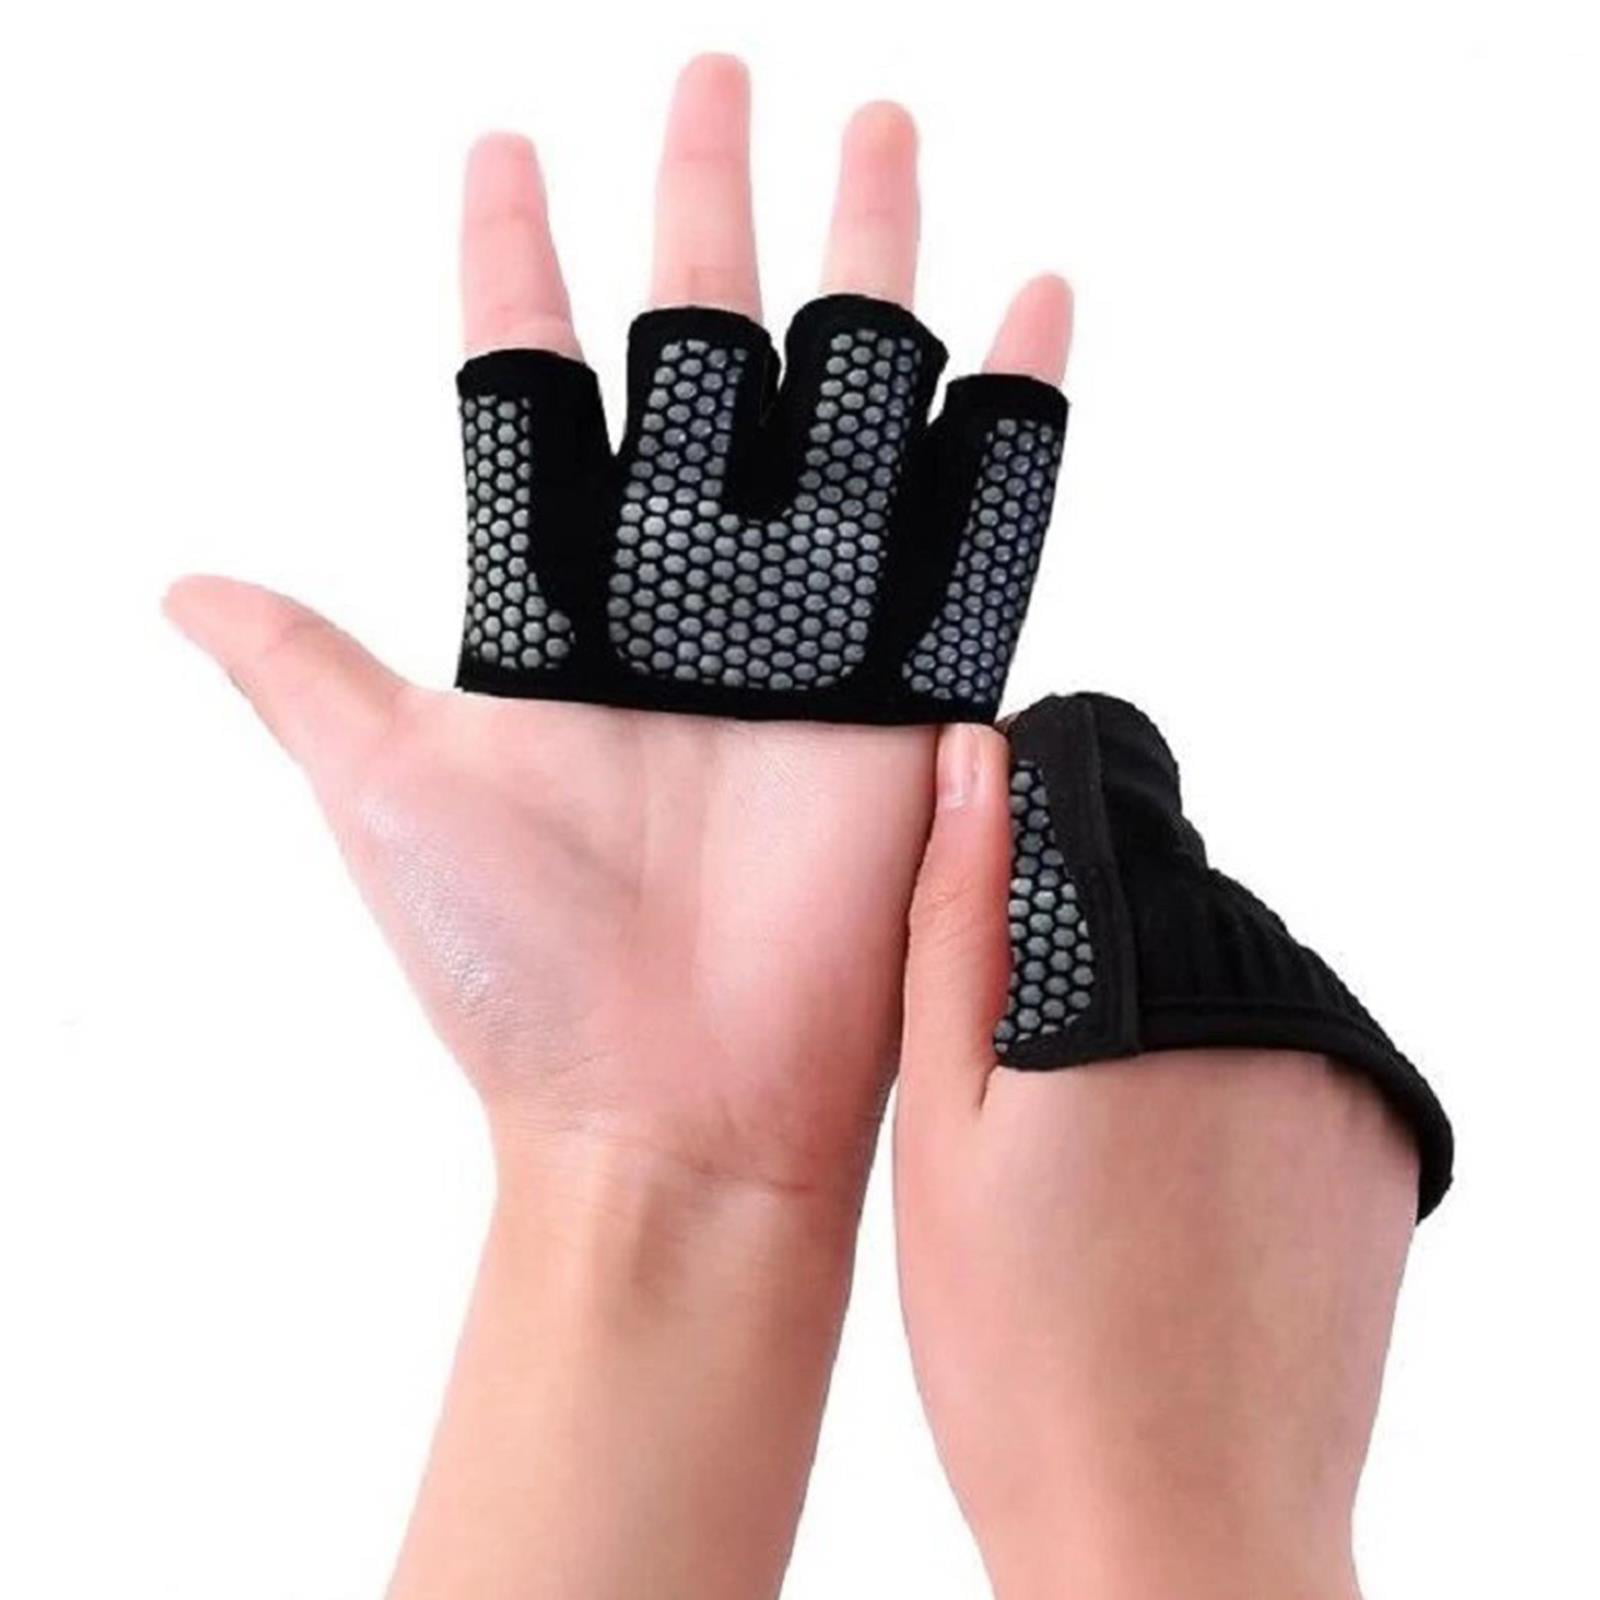 M/L/XL Pair of Black Four Finger Gloves for Motorcycle Yoga Strength Training 